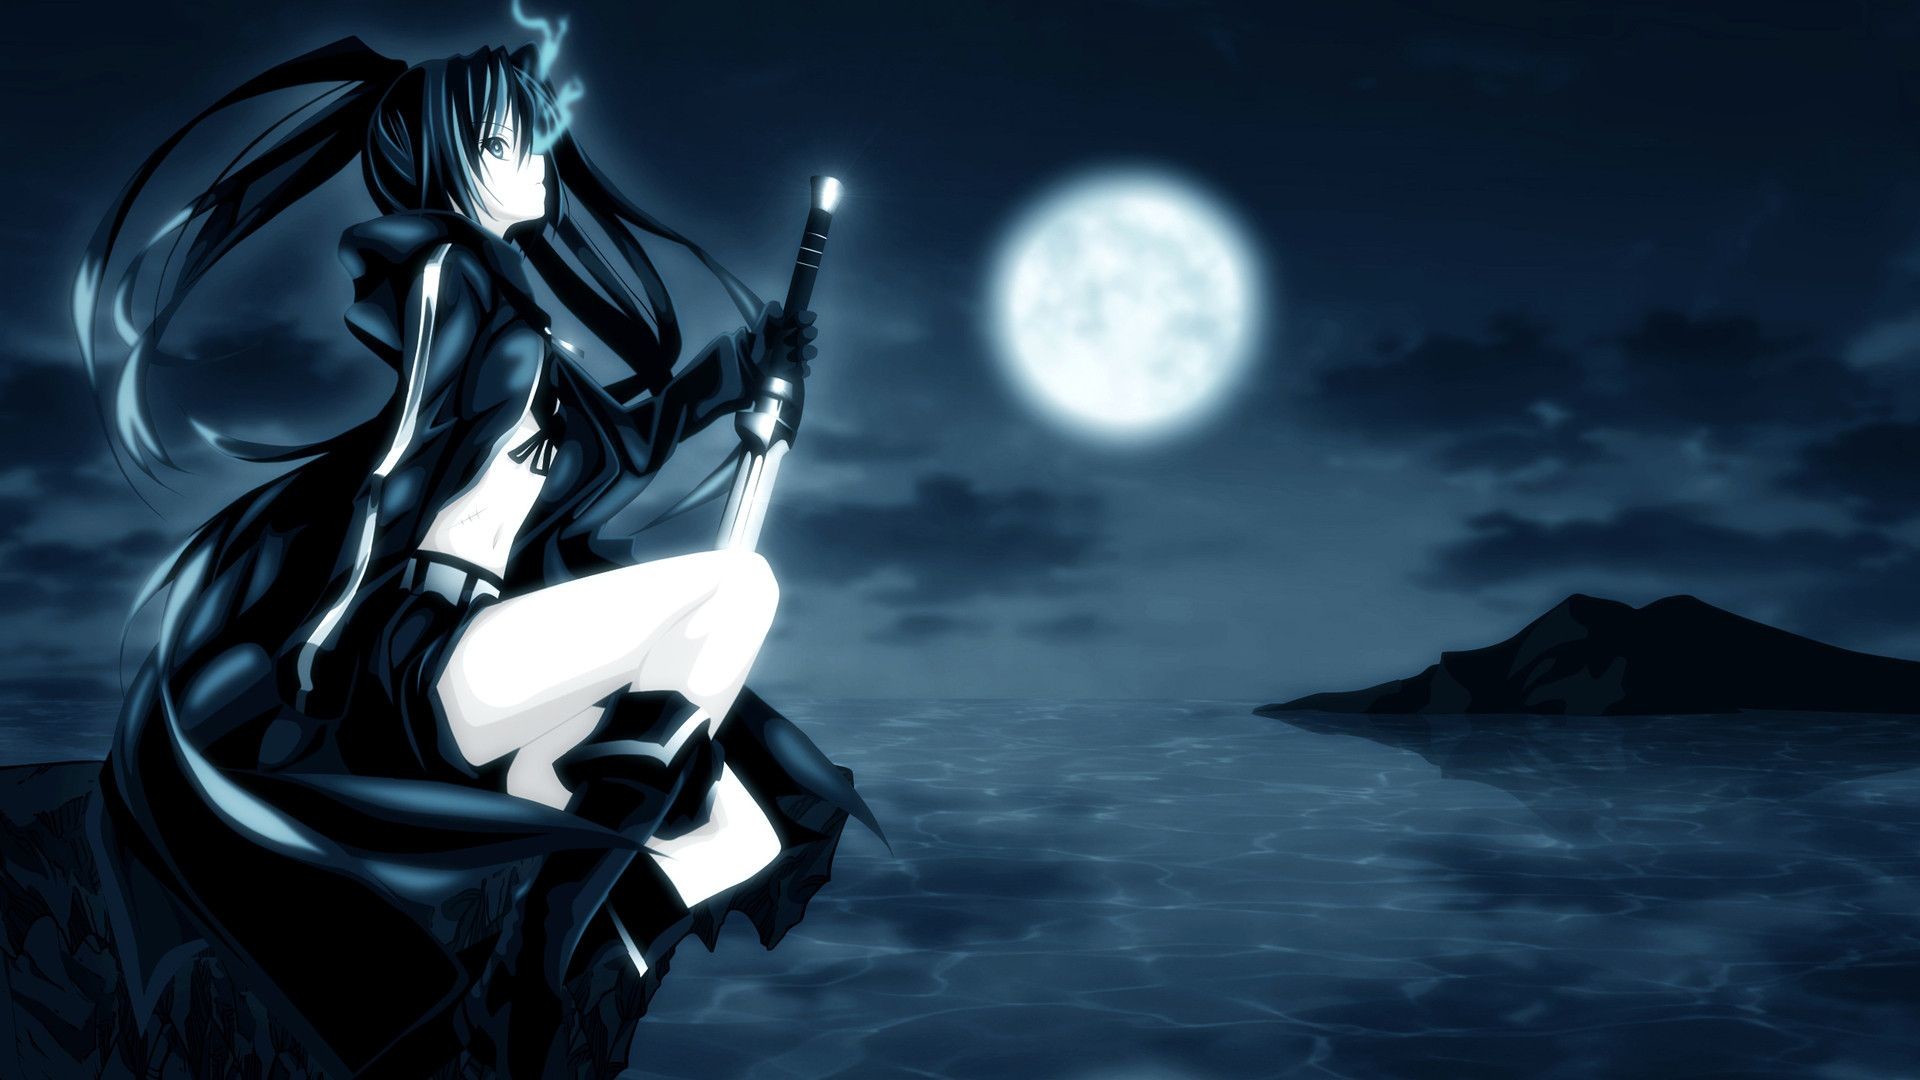 1920x1080 Anime Wallpapers HD Wallpapers Download Free Map Images Wallpaper [wallpaper376.blogspot.com]